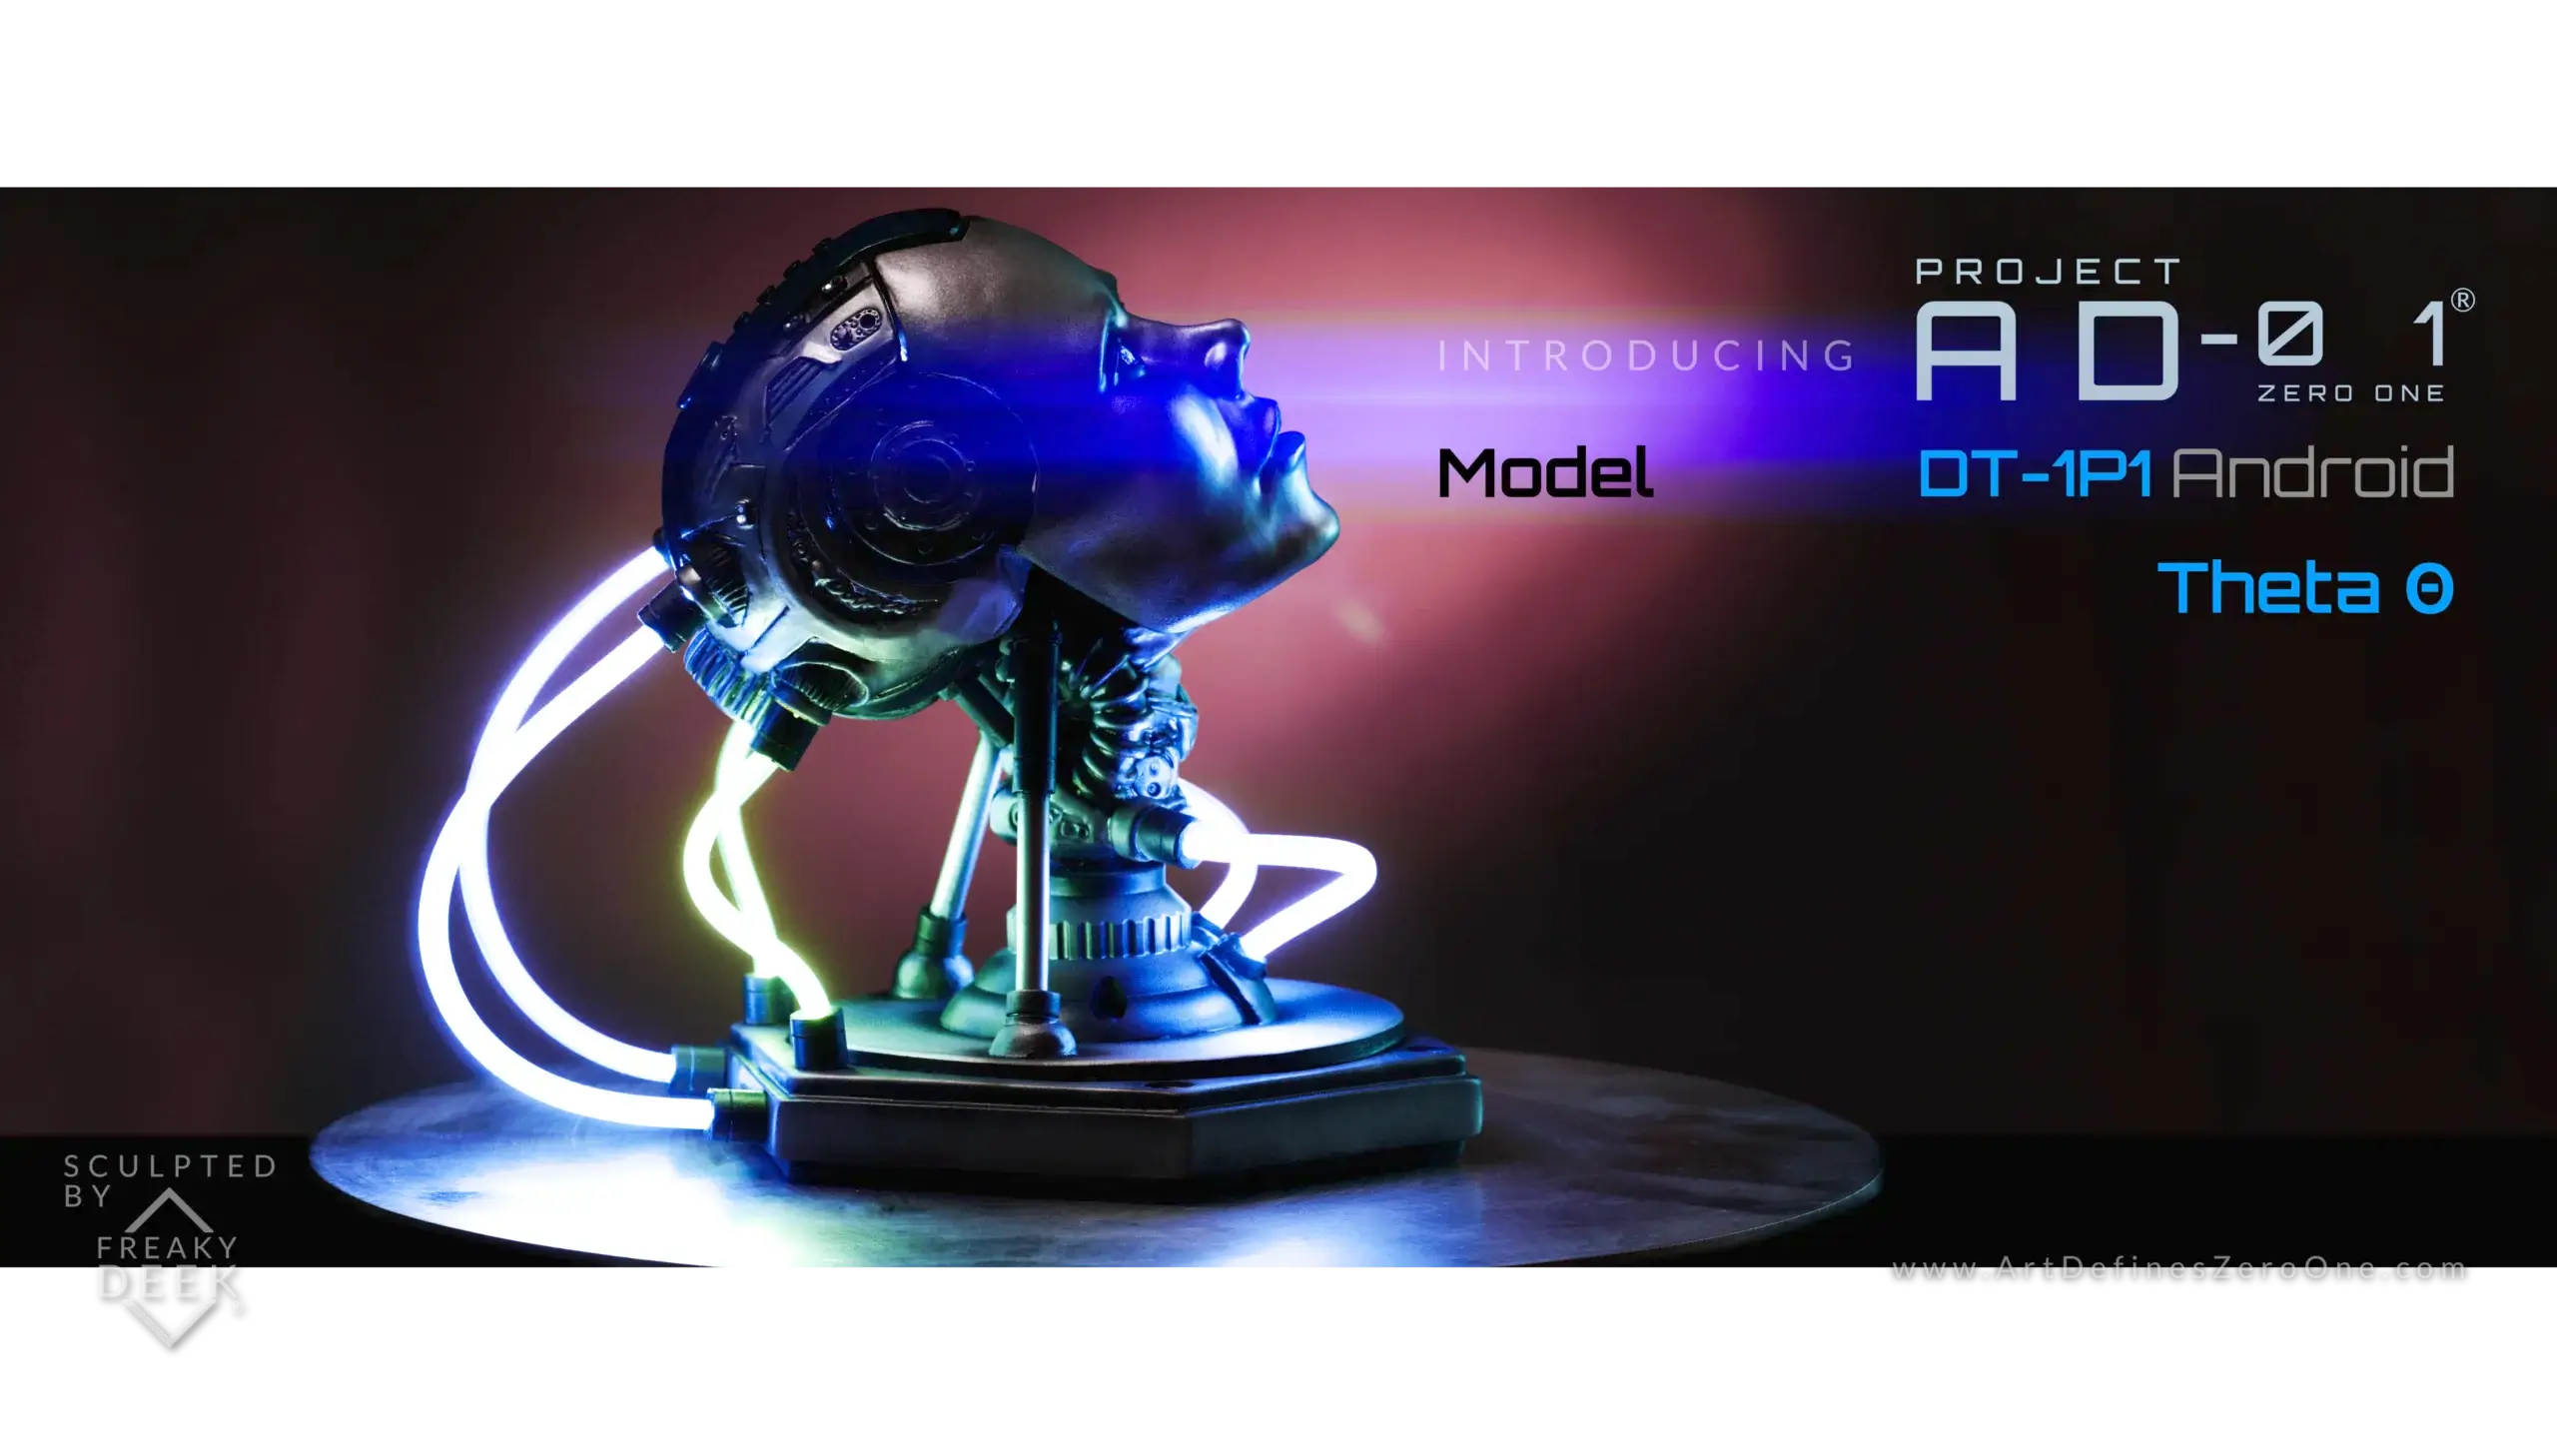 Project AD-01 handmade android sculpture Theta with LED light side view